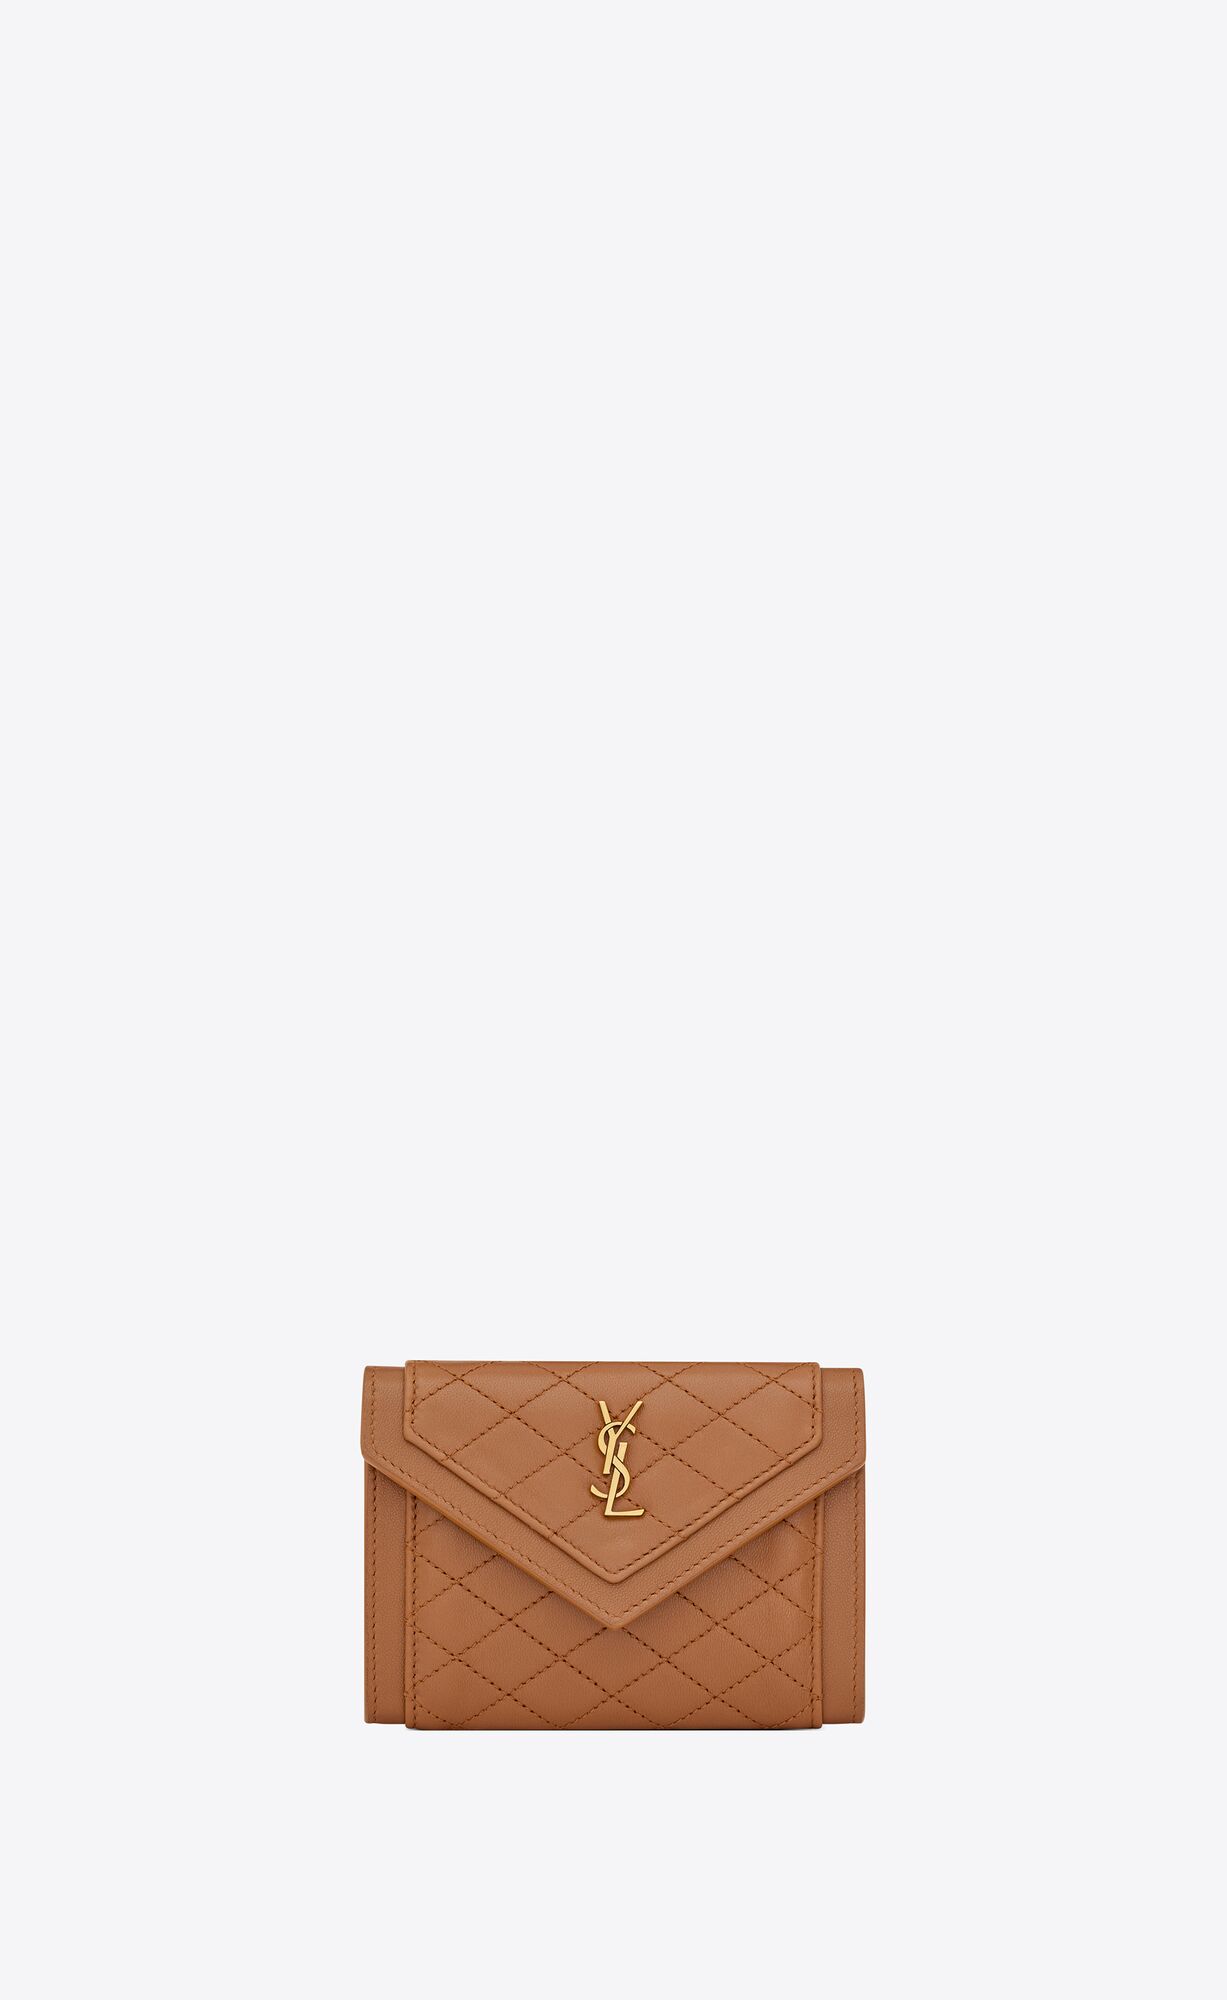 GABY SMALL ENVELOPE WALLET IN QUILTED LAMBSKIN | Saint Laurent | YSL.com